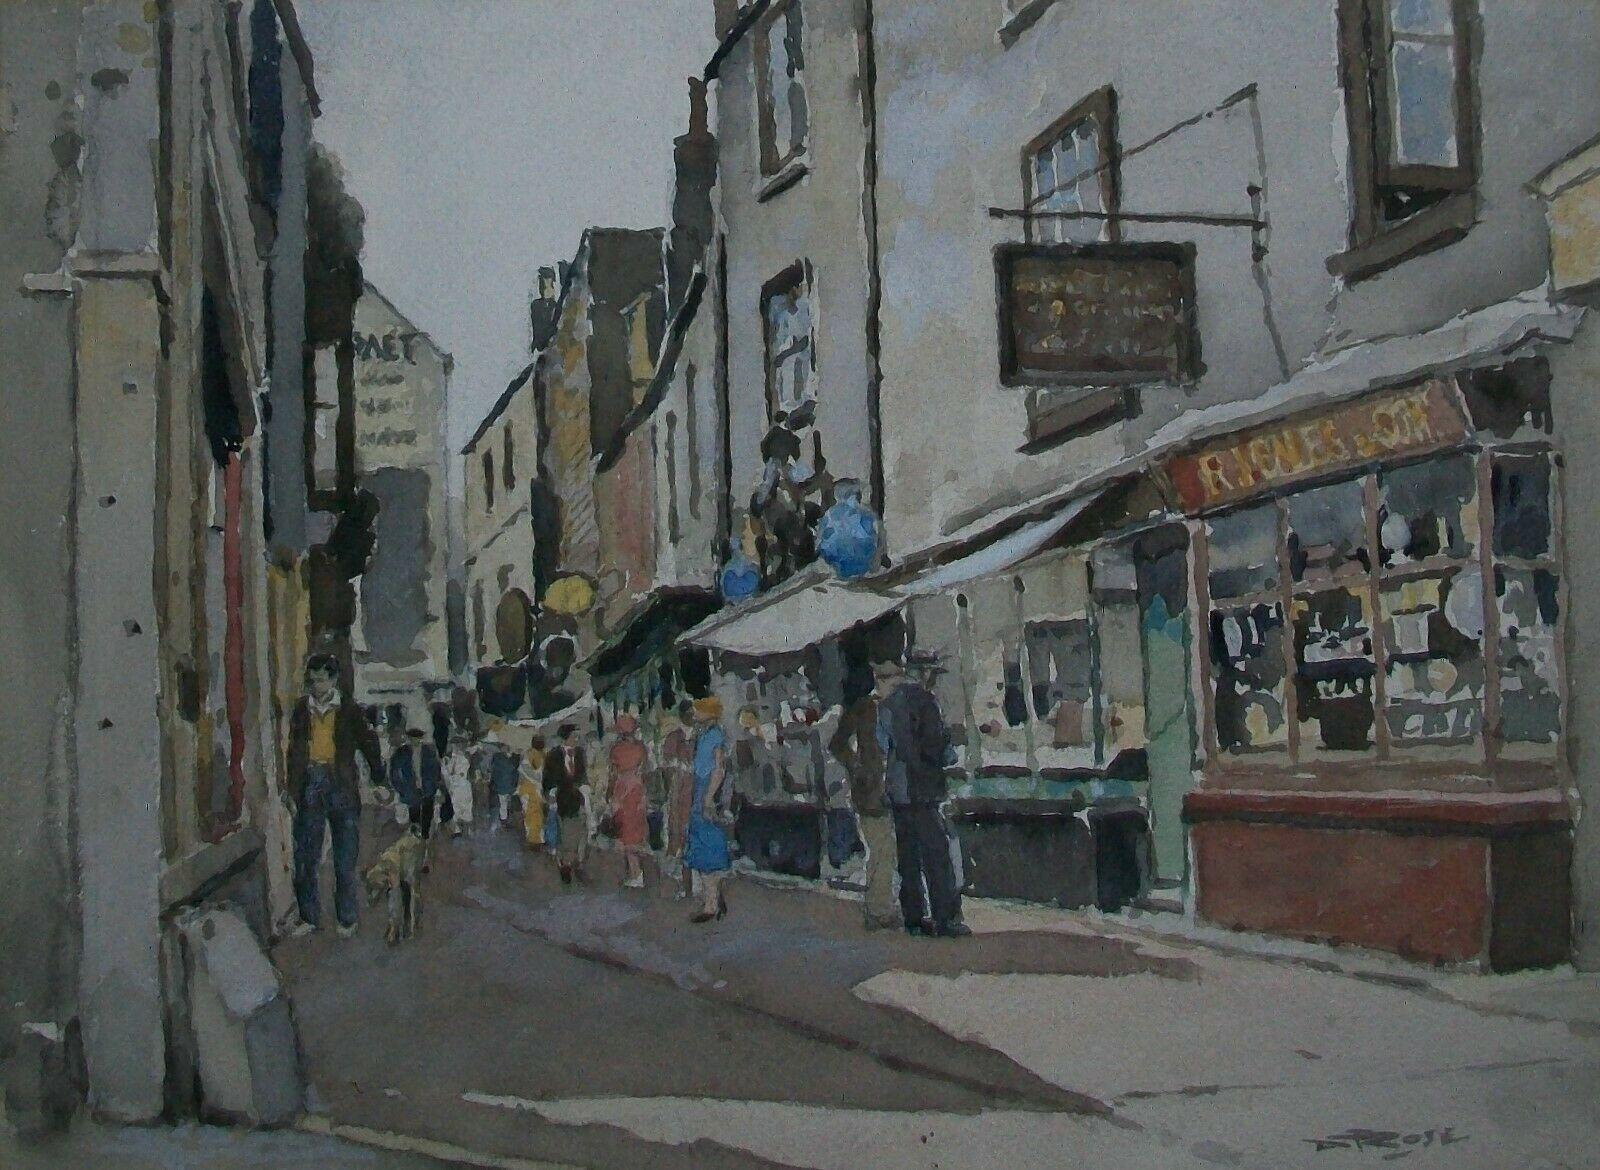 DAVID THOMAS ROSE (1871-1964, Scottish) - 'Brighton Lanes' - Post War watercolor painting on paper - unframed - signed lower right and titled verso - United Kingdom - circa 1940's.

Excellent vintage condition - unframed - no loss - no damage - no